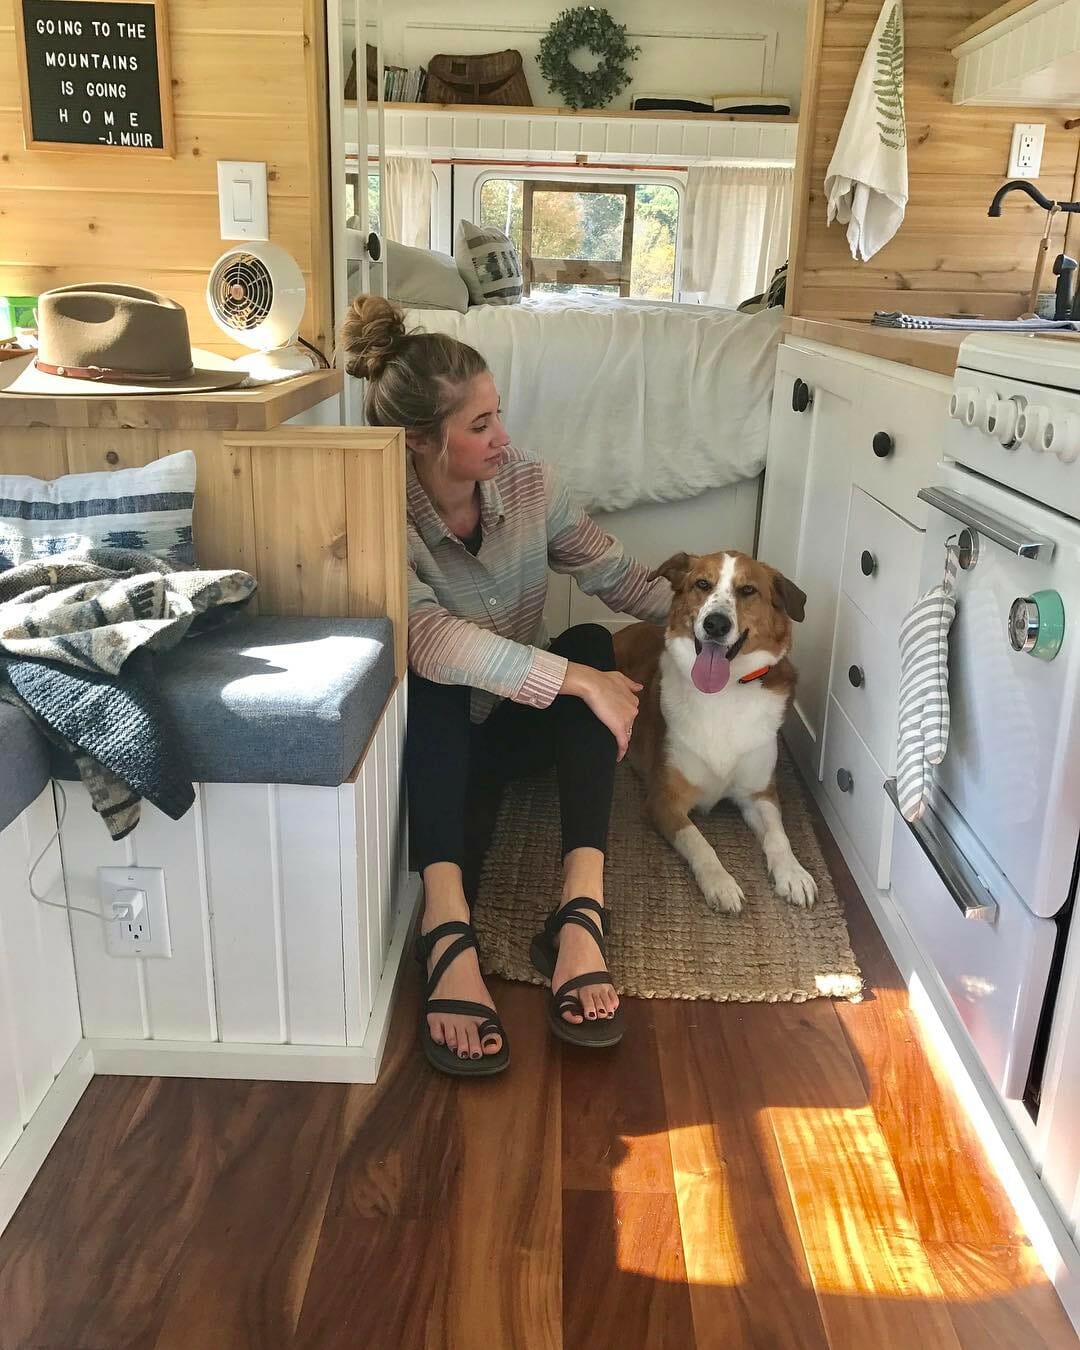 living in a tiny home, bus or RV